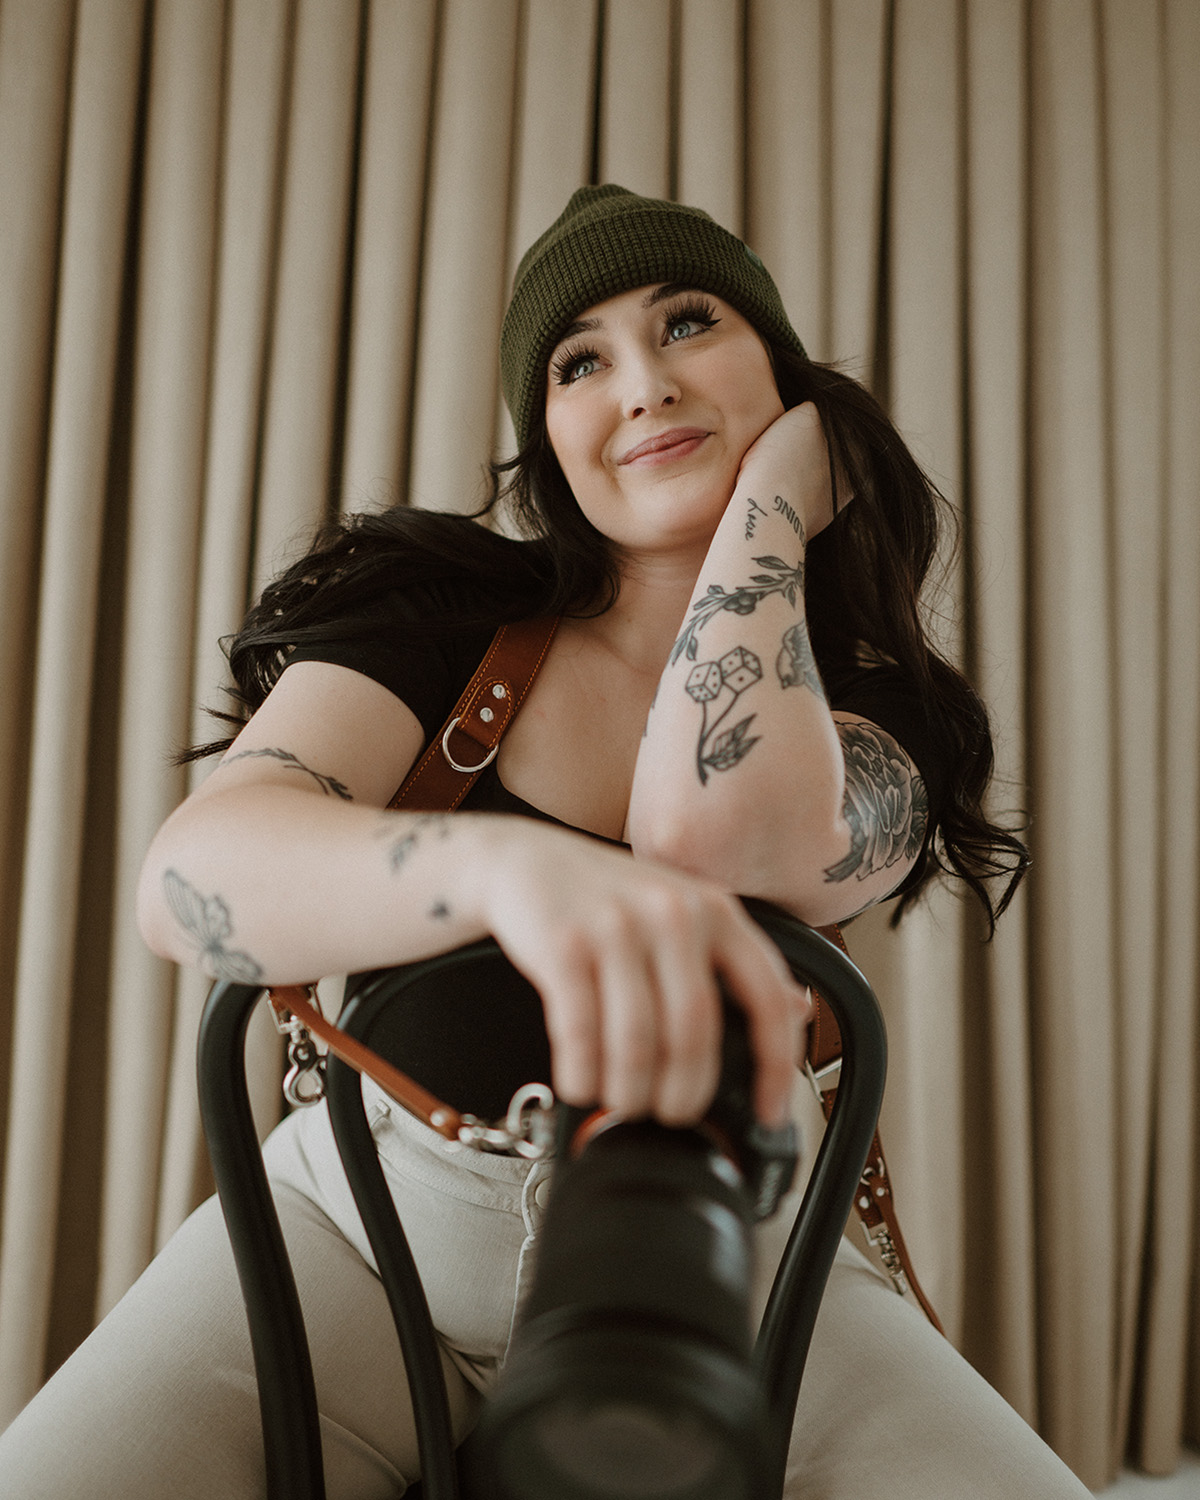 Morgan Furst, Owner of Furst Shot Photography, sits in a chair with her camera in hand